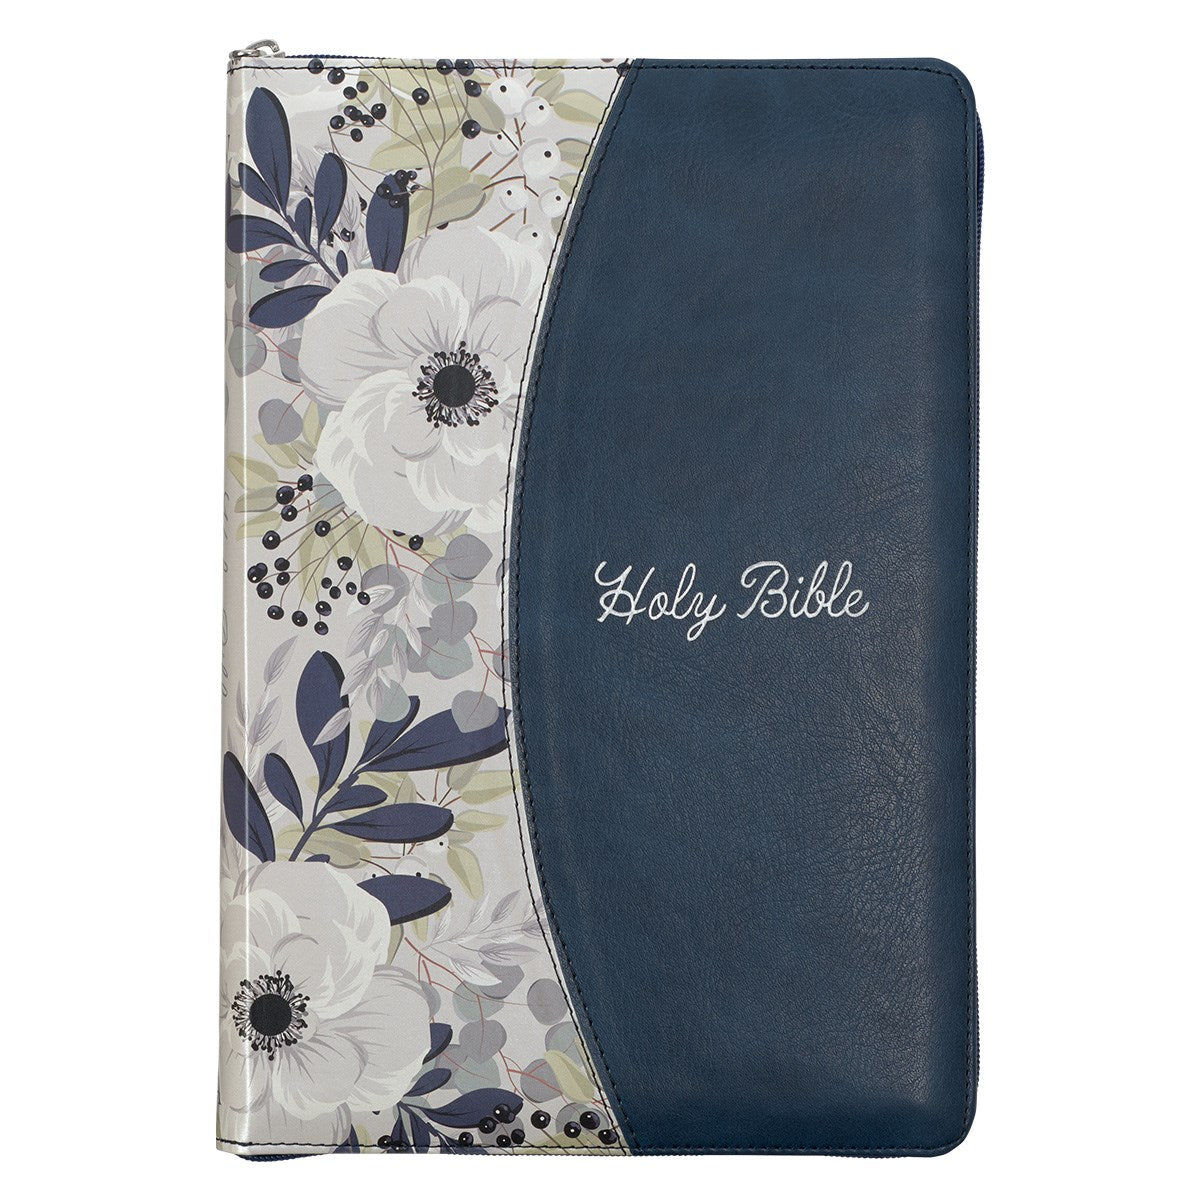 Seed of Abraham Christian Bookstore - (In)Courage - KJV Large Print Thinline Bible-Blue Pearlized Floral LuxLeather with Zipper Indexed